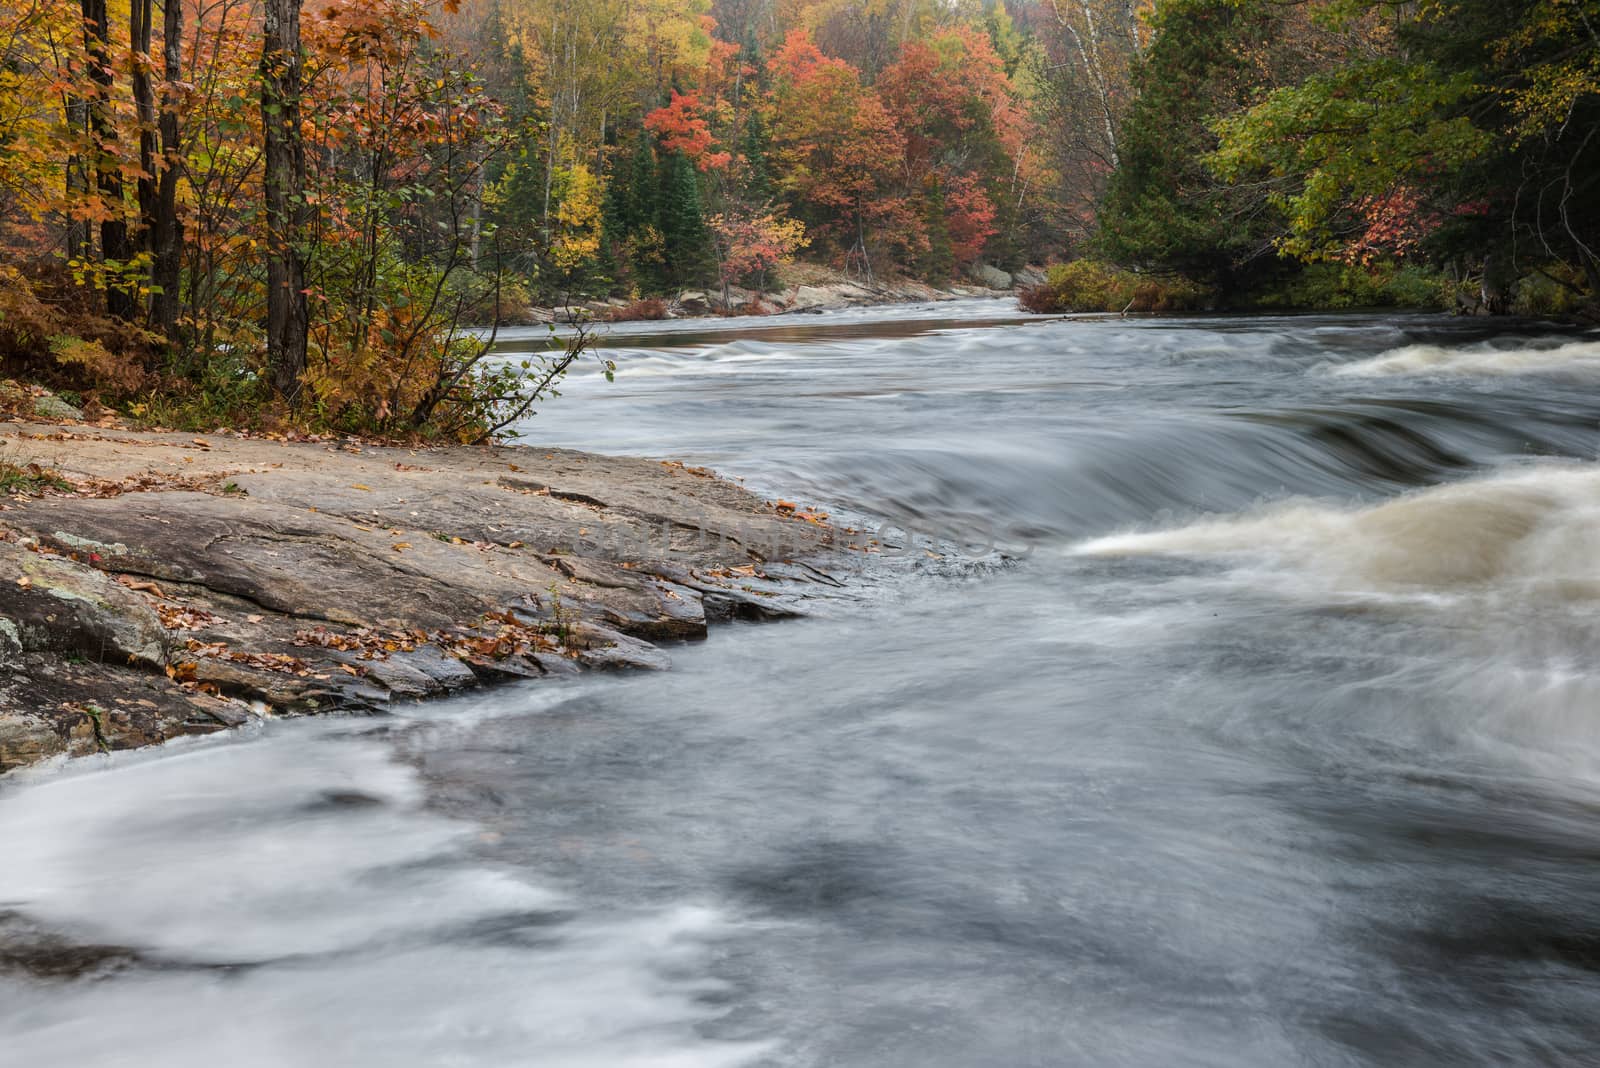 Small rapids and colorful autumn forest at Oxtongue river, Muskoka, Canada